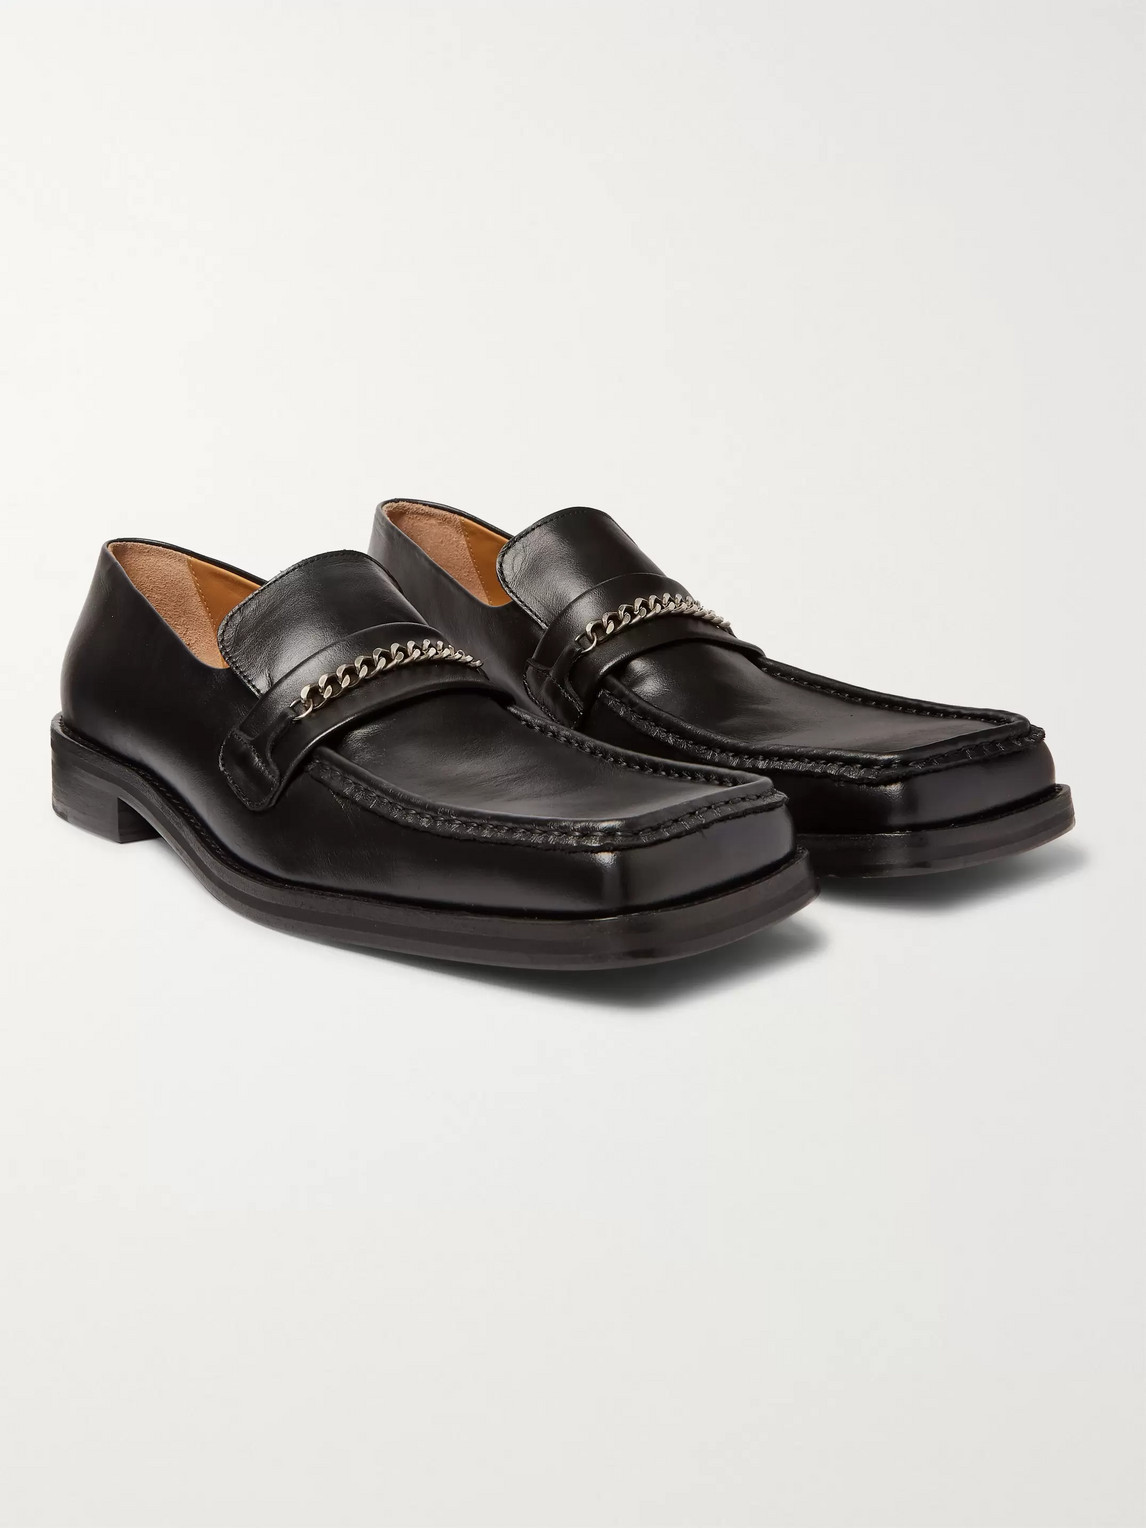 MARTINE ROSE CHAIN-TRIMMED LEATHER LOAFERS